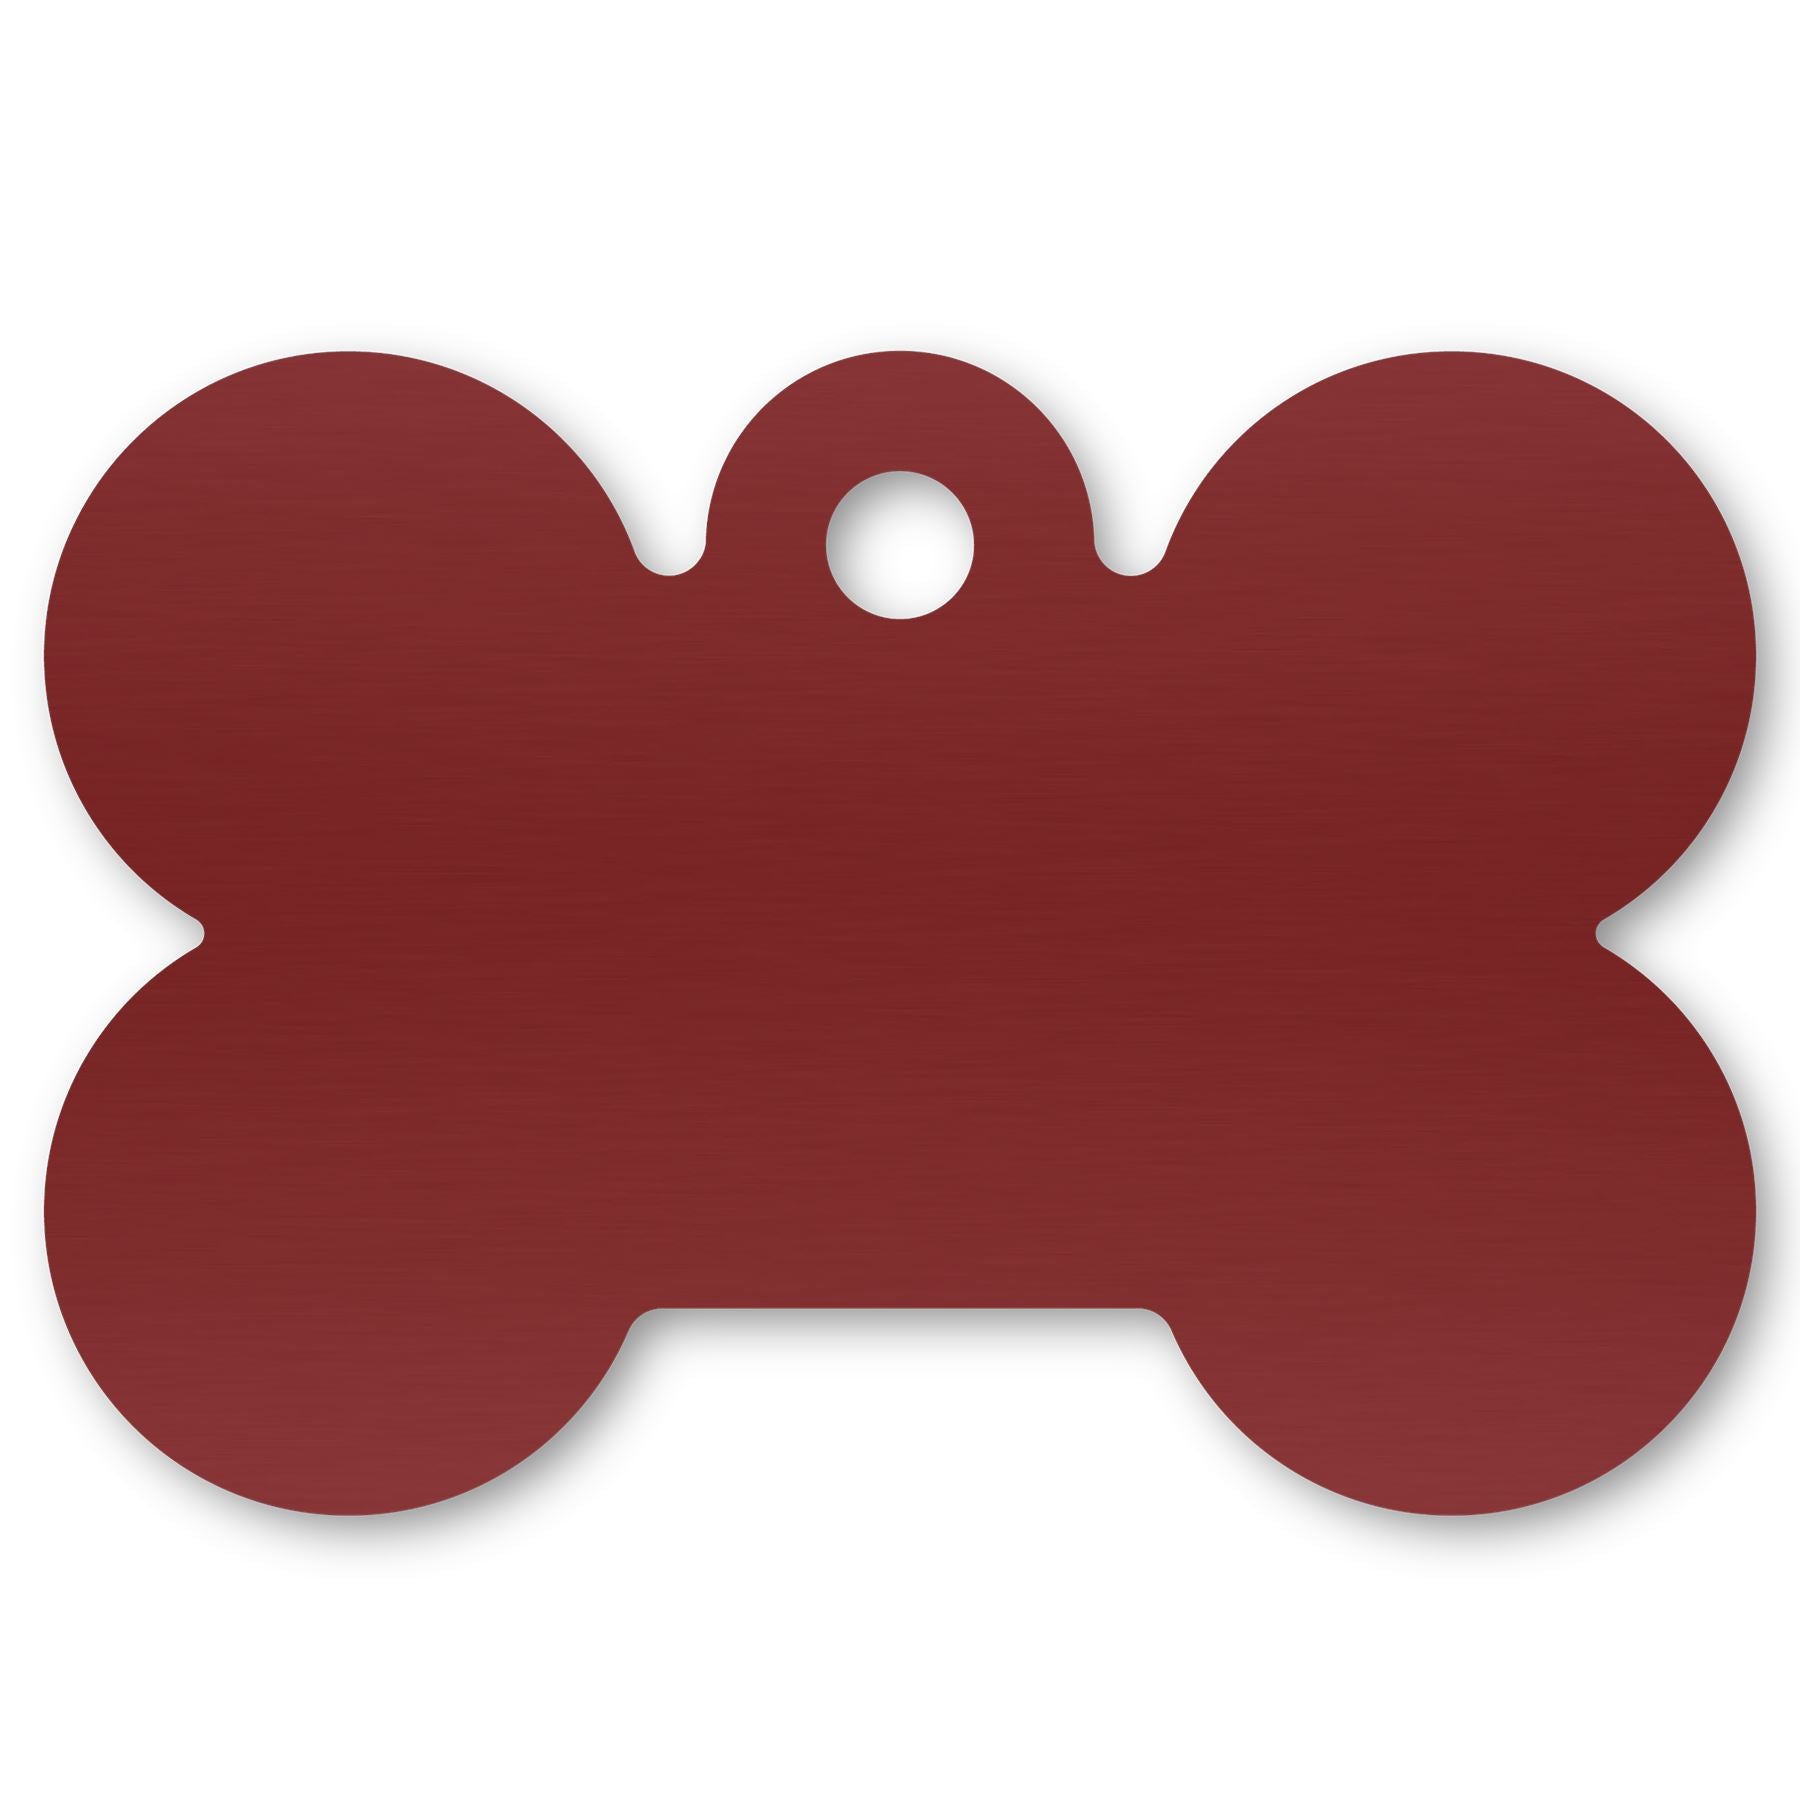 Anodized Aluminum Dog Bone Shaped Tags, 7/8" x 1-3/16" with 3/32" Hole, Laser Engraved Metal Tags Craftworks NW Red 